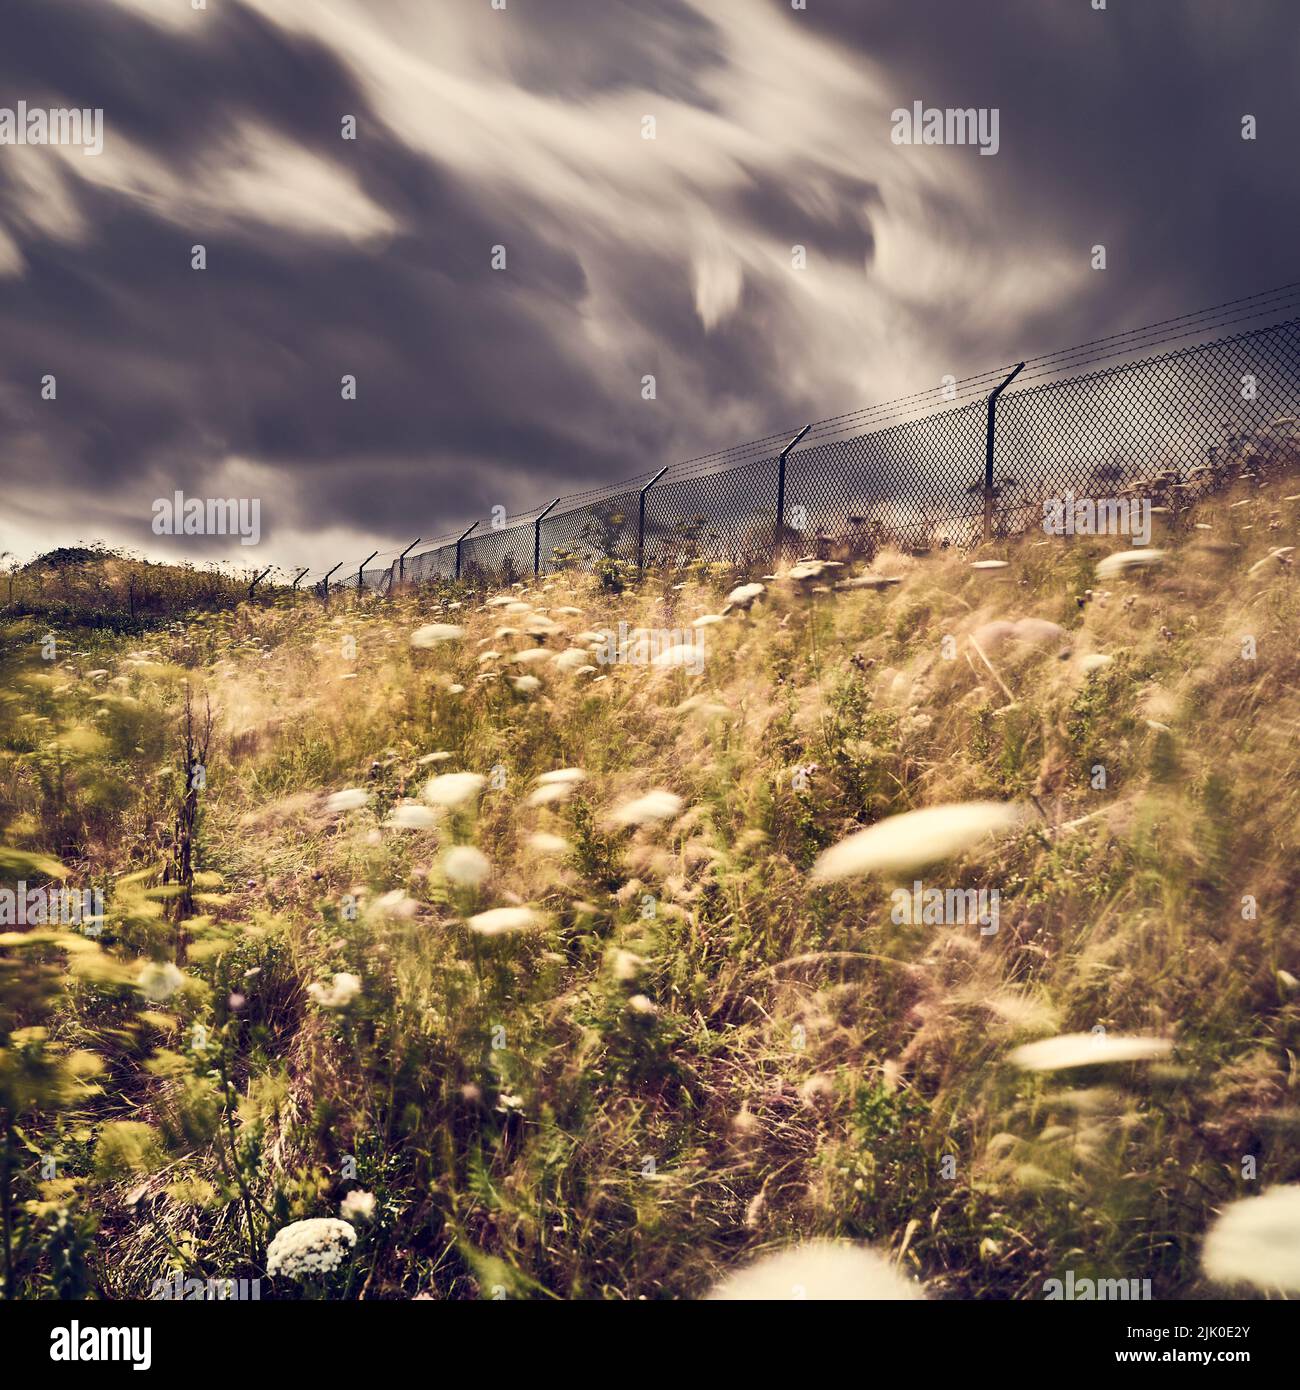 Wild flowers and clouds moving in the wind at start of storm Stock Photo